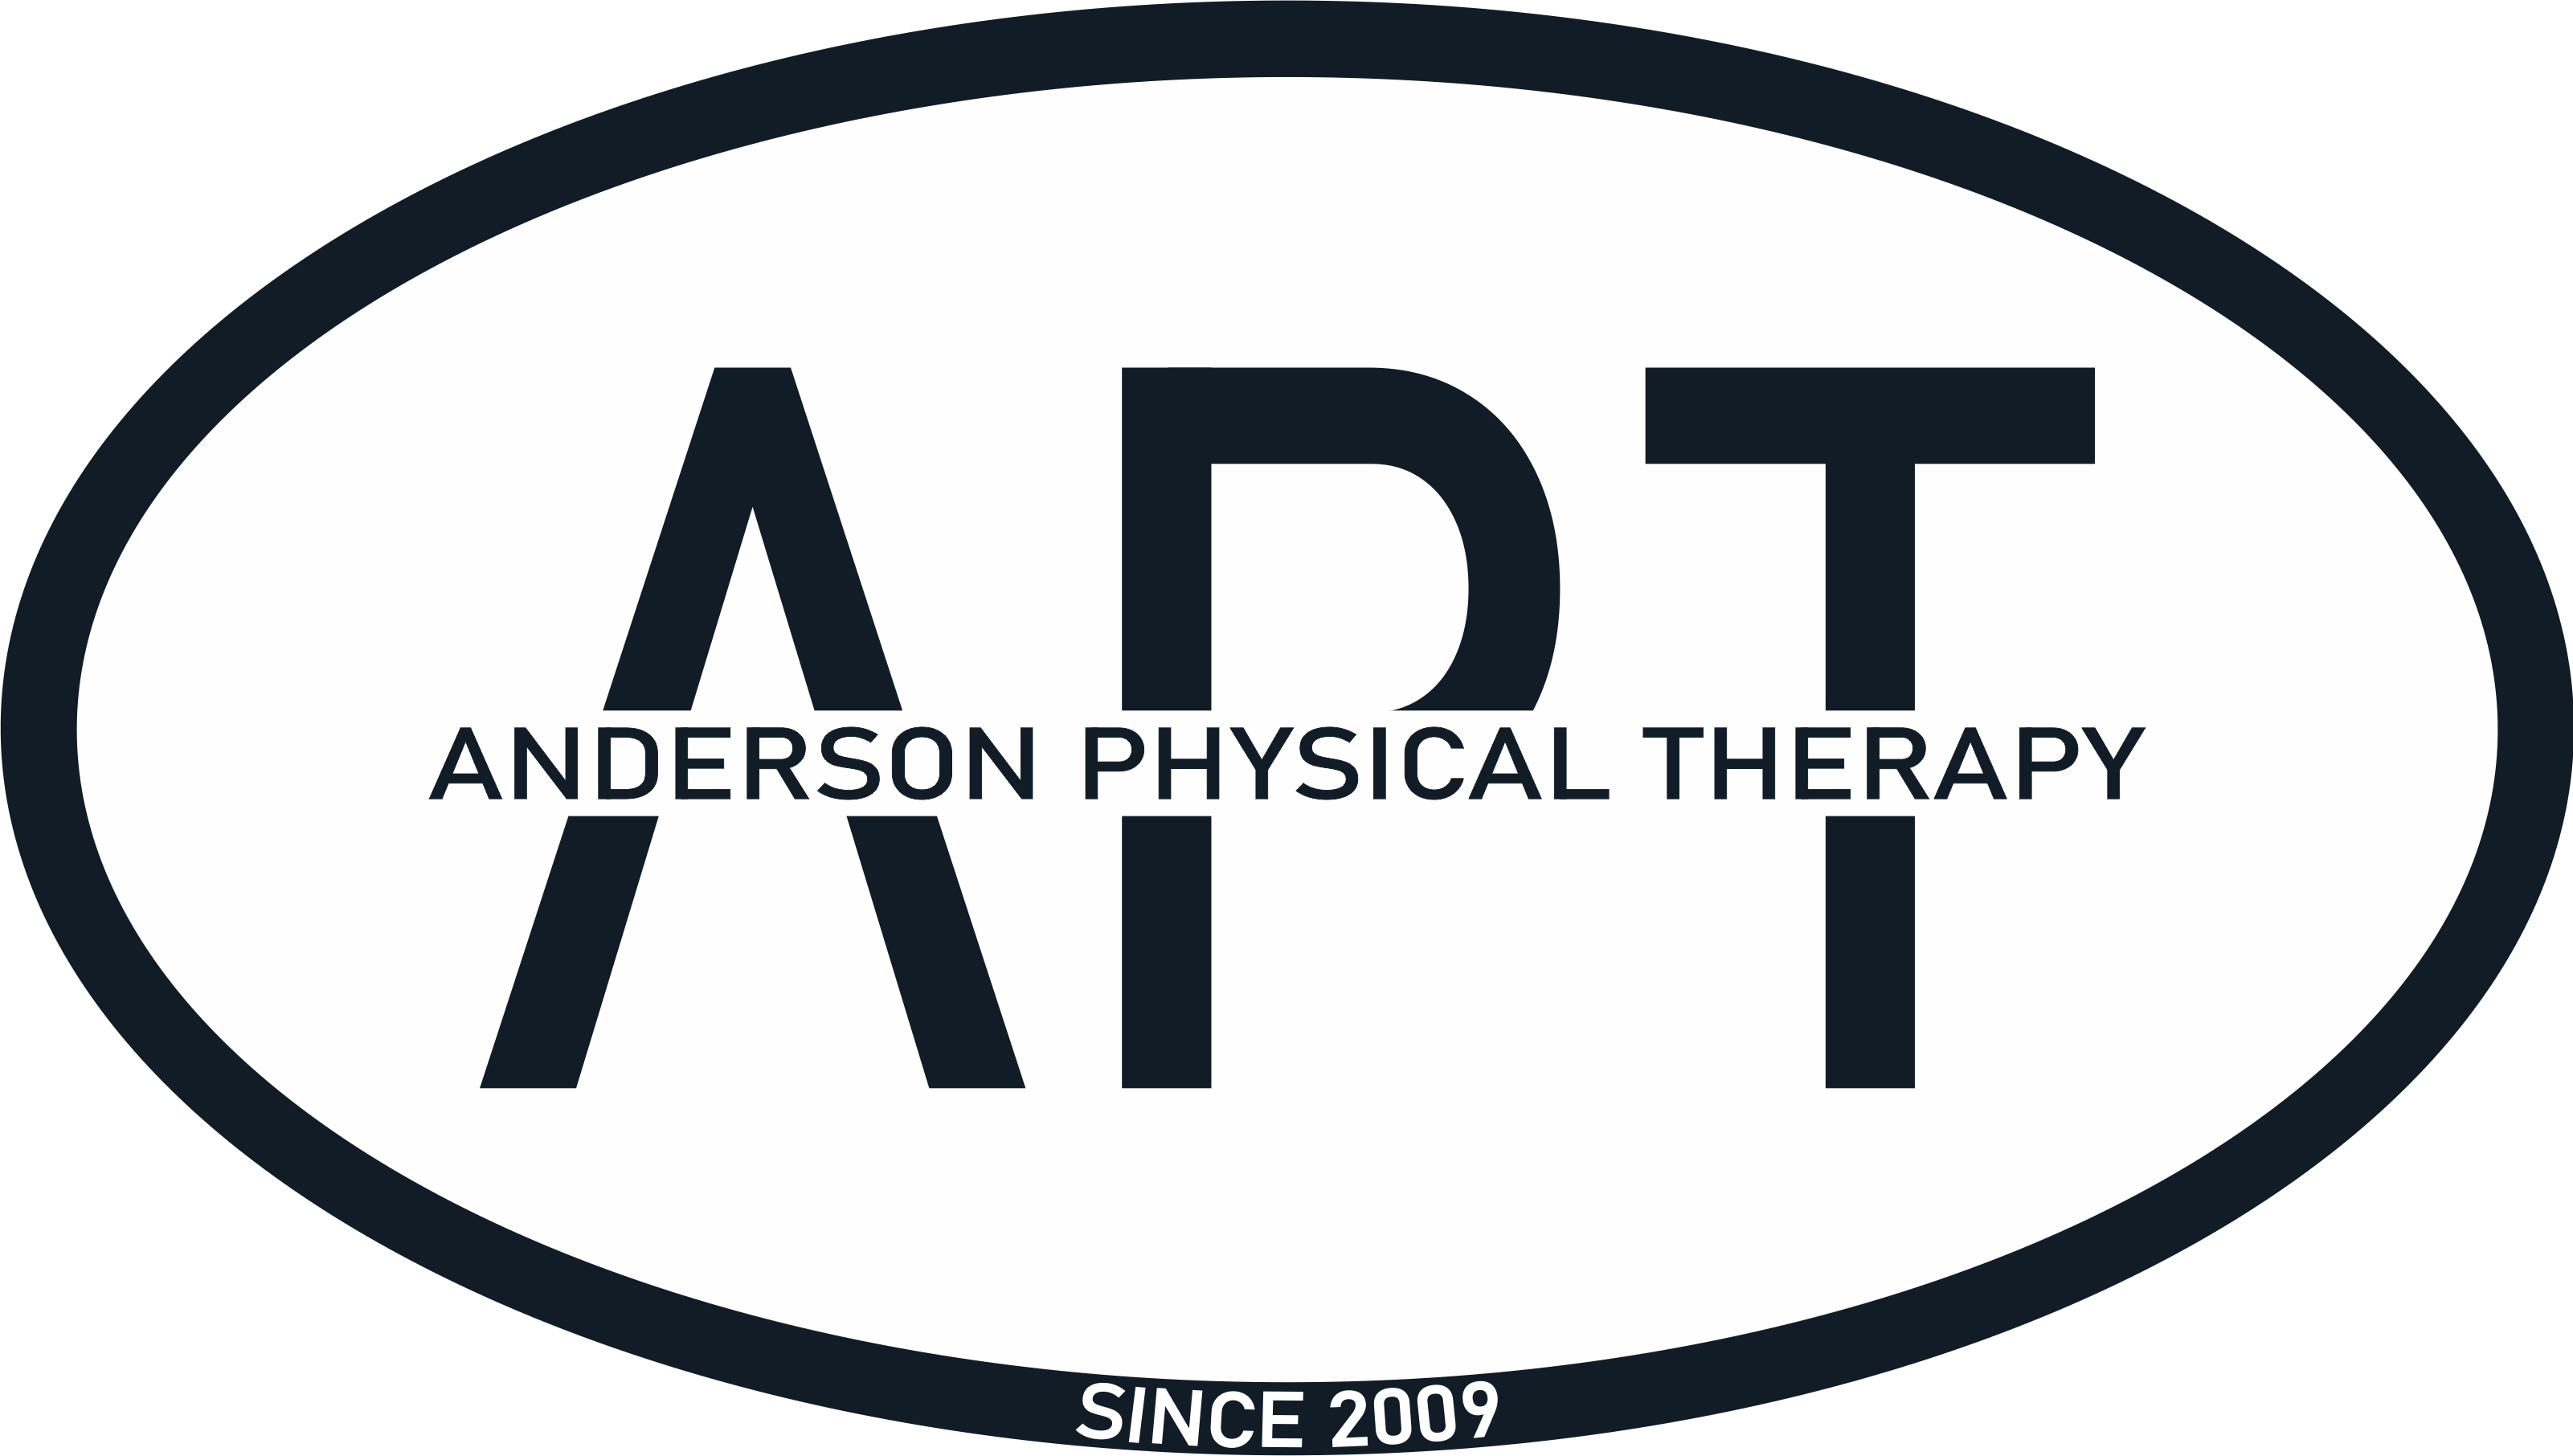 Anderson Physical Therapy